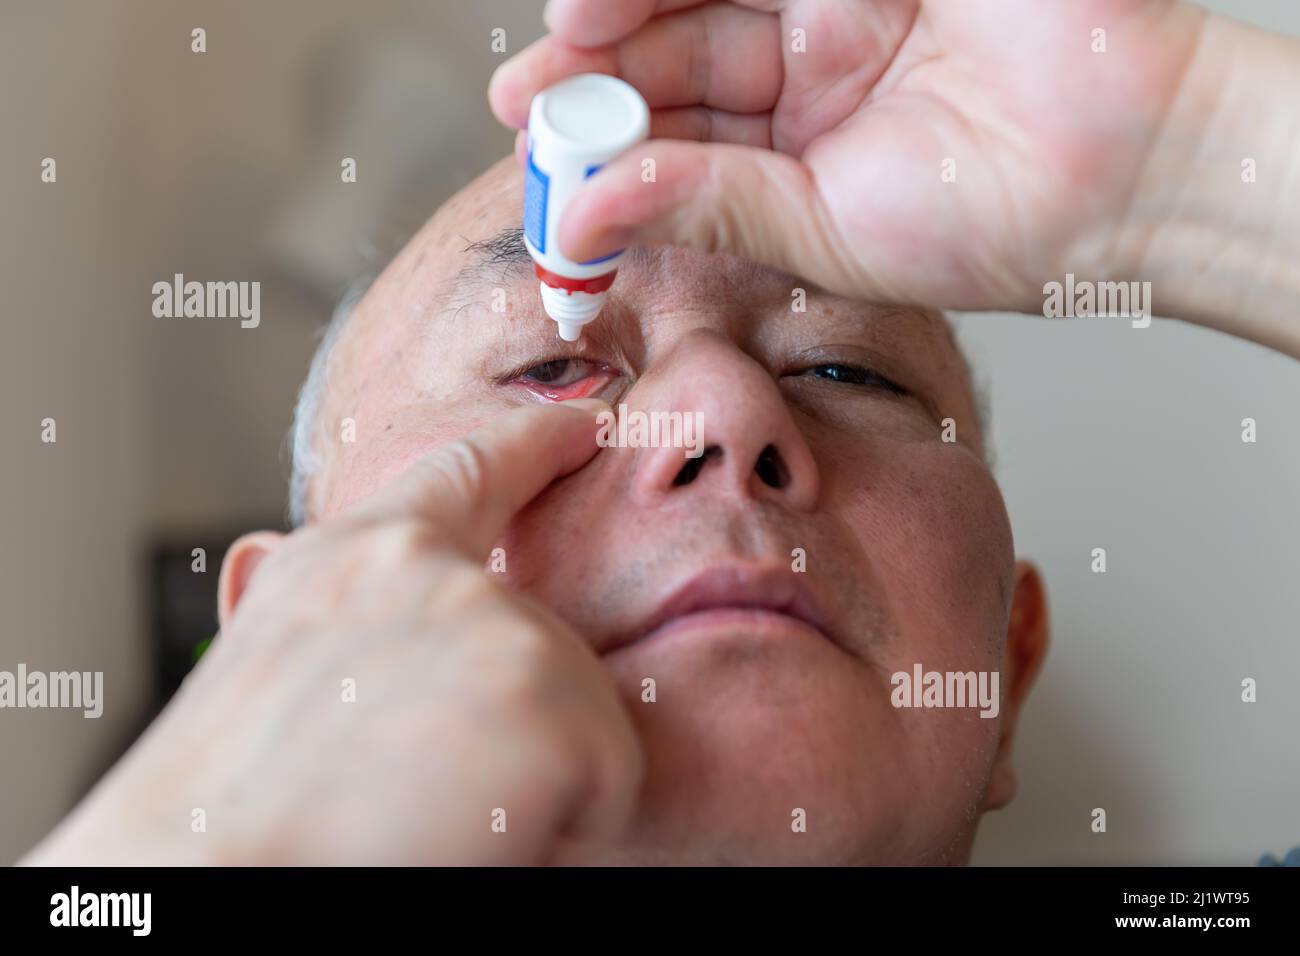 A man applying anti bacterial eye drops to a red infected eye. Stock Photo